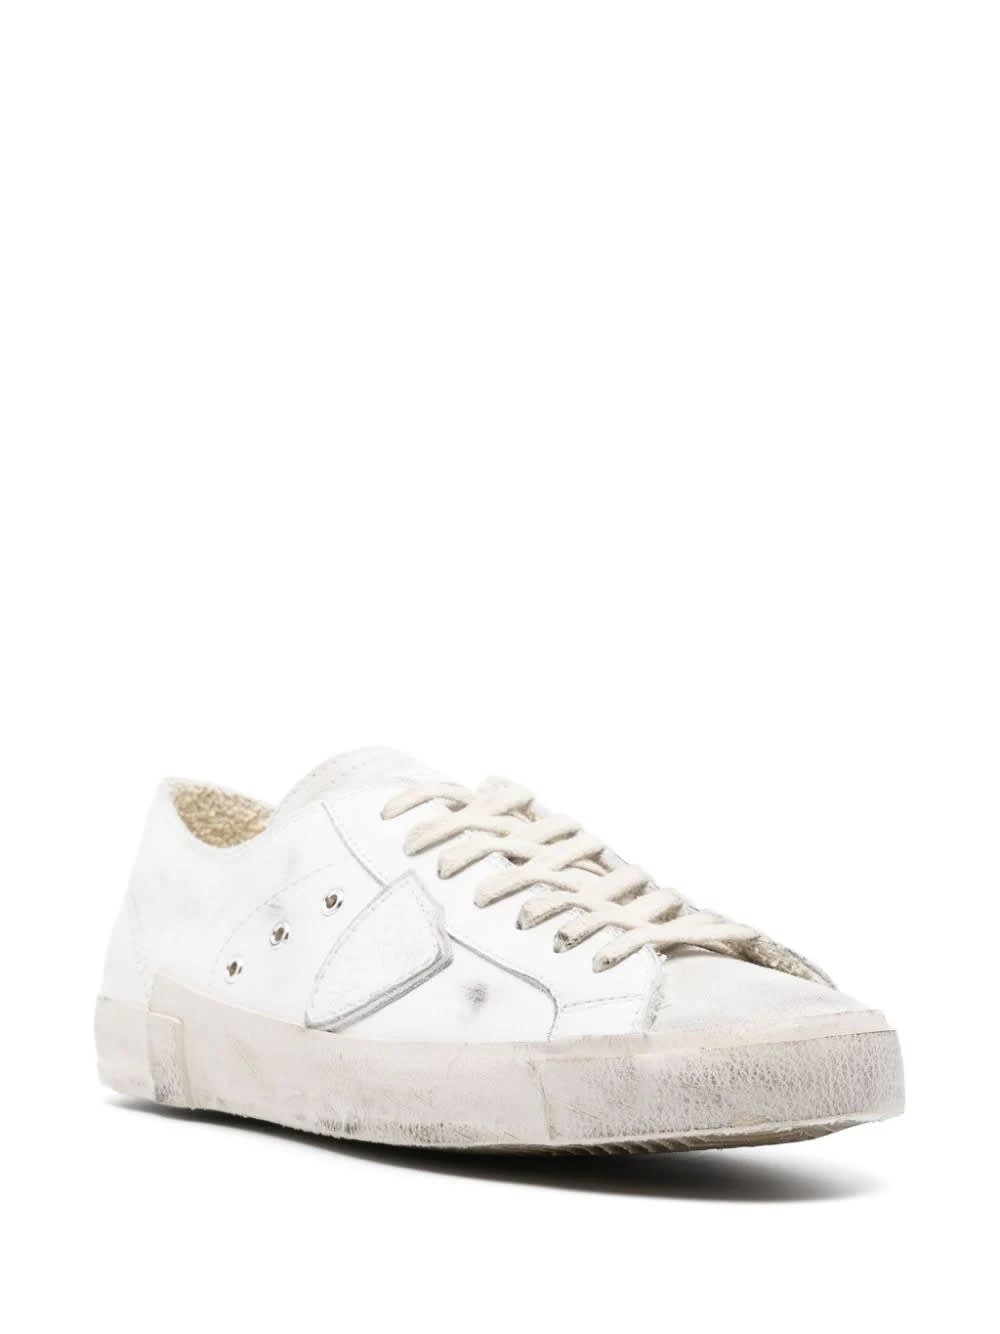 Shop Philippe Model Prsx Low Sneakers - White